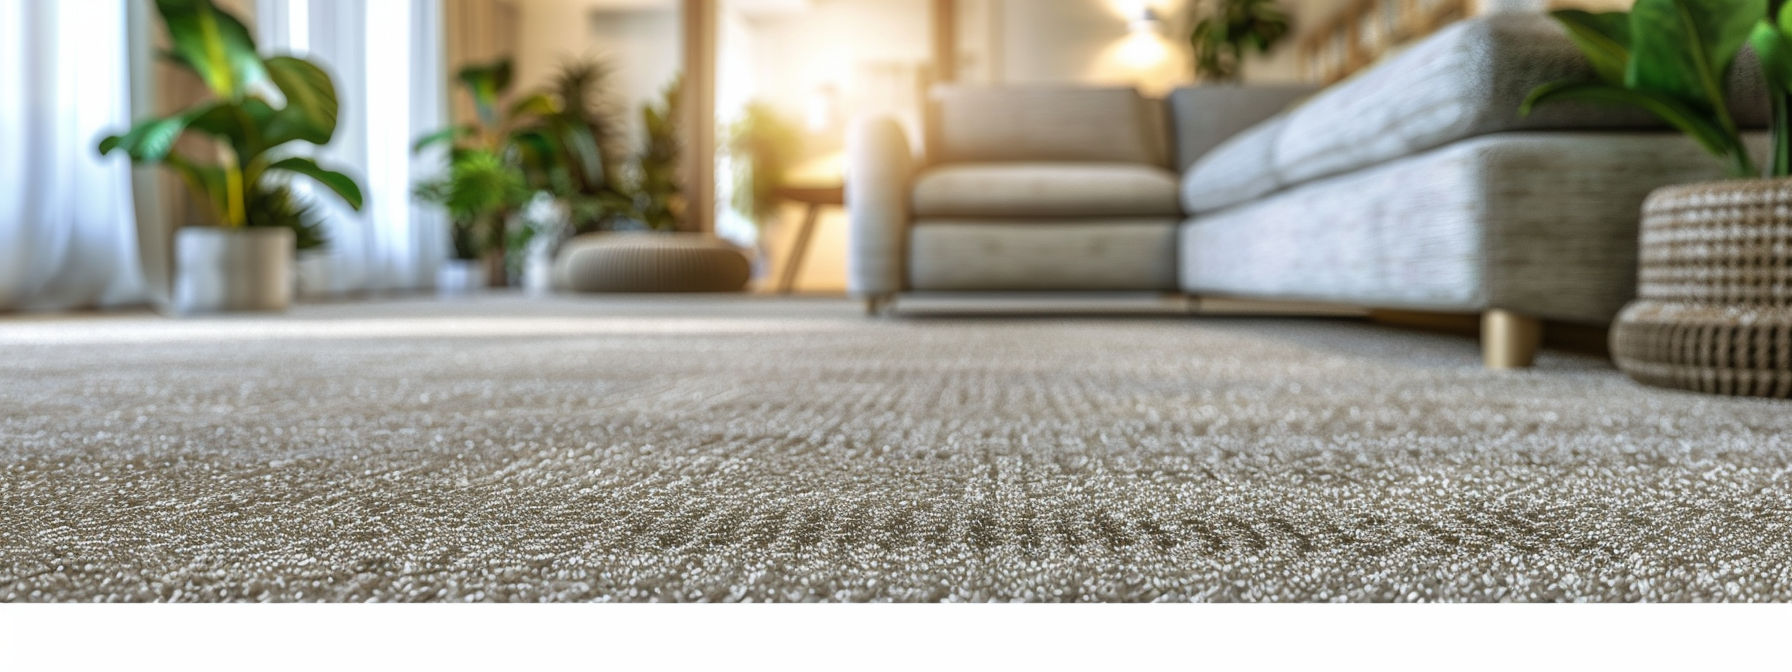 The Science Behind Carpet Wear: How to Prevent Damage